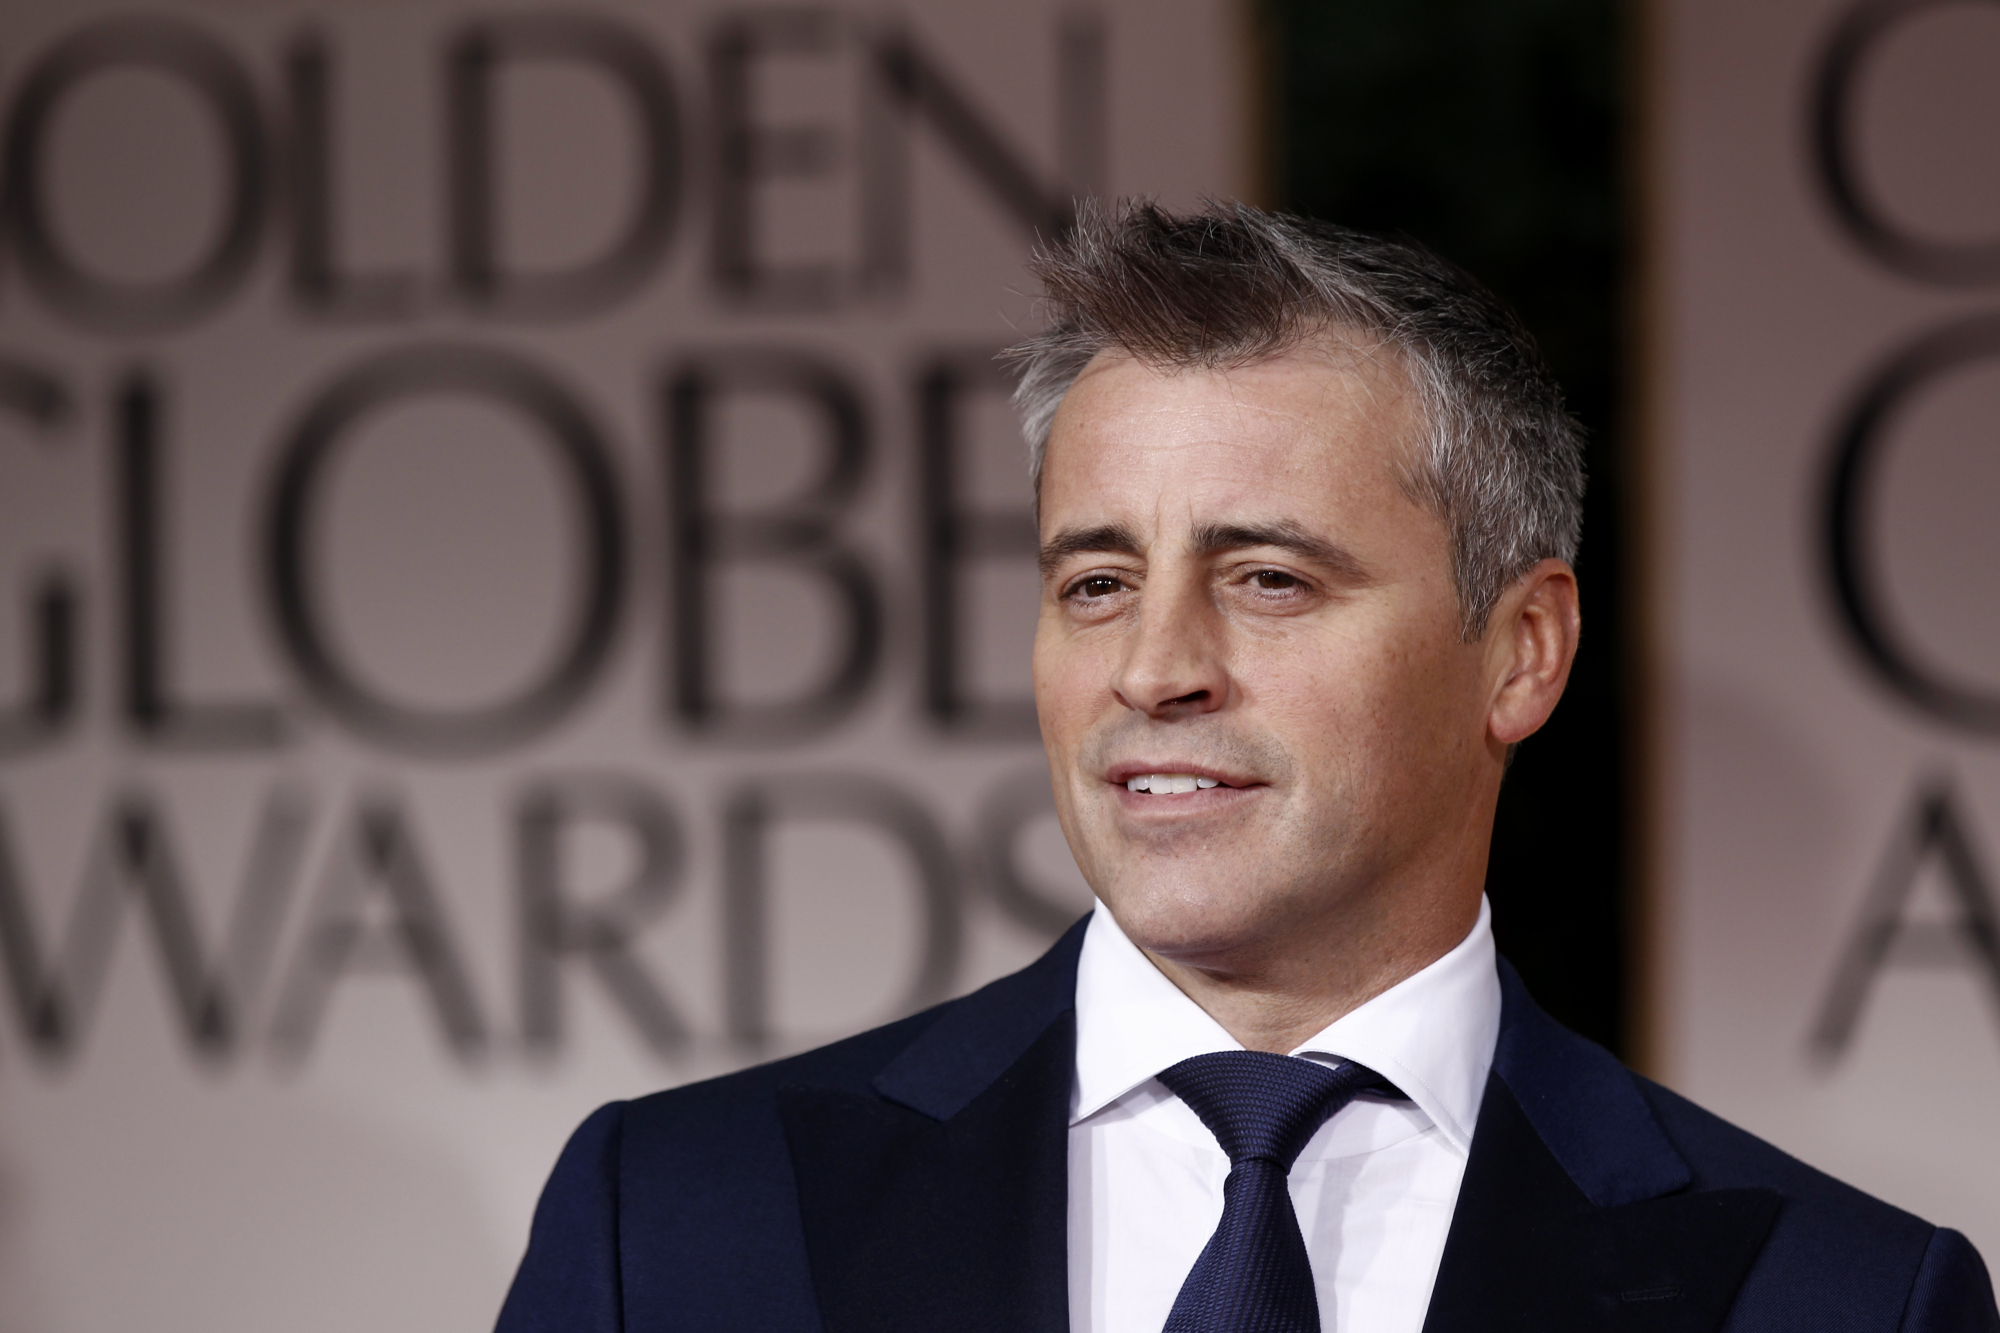 undtagelse Deltage Sprede Matt LeBlanc of 'Friends' fame to step down as BBC 'Top Gear' host, citing  travel demands - The Japan Times